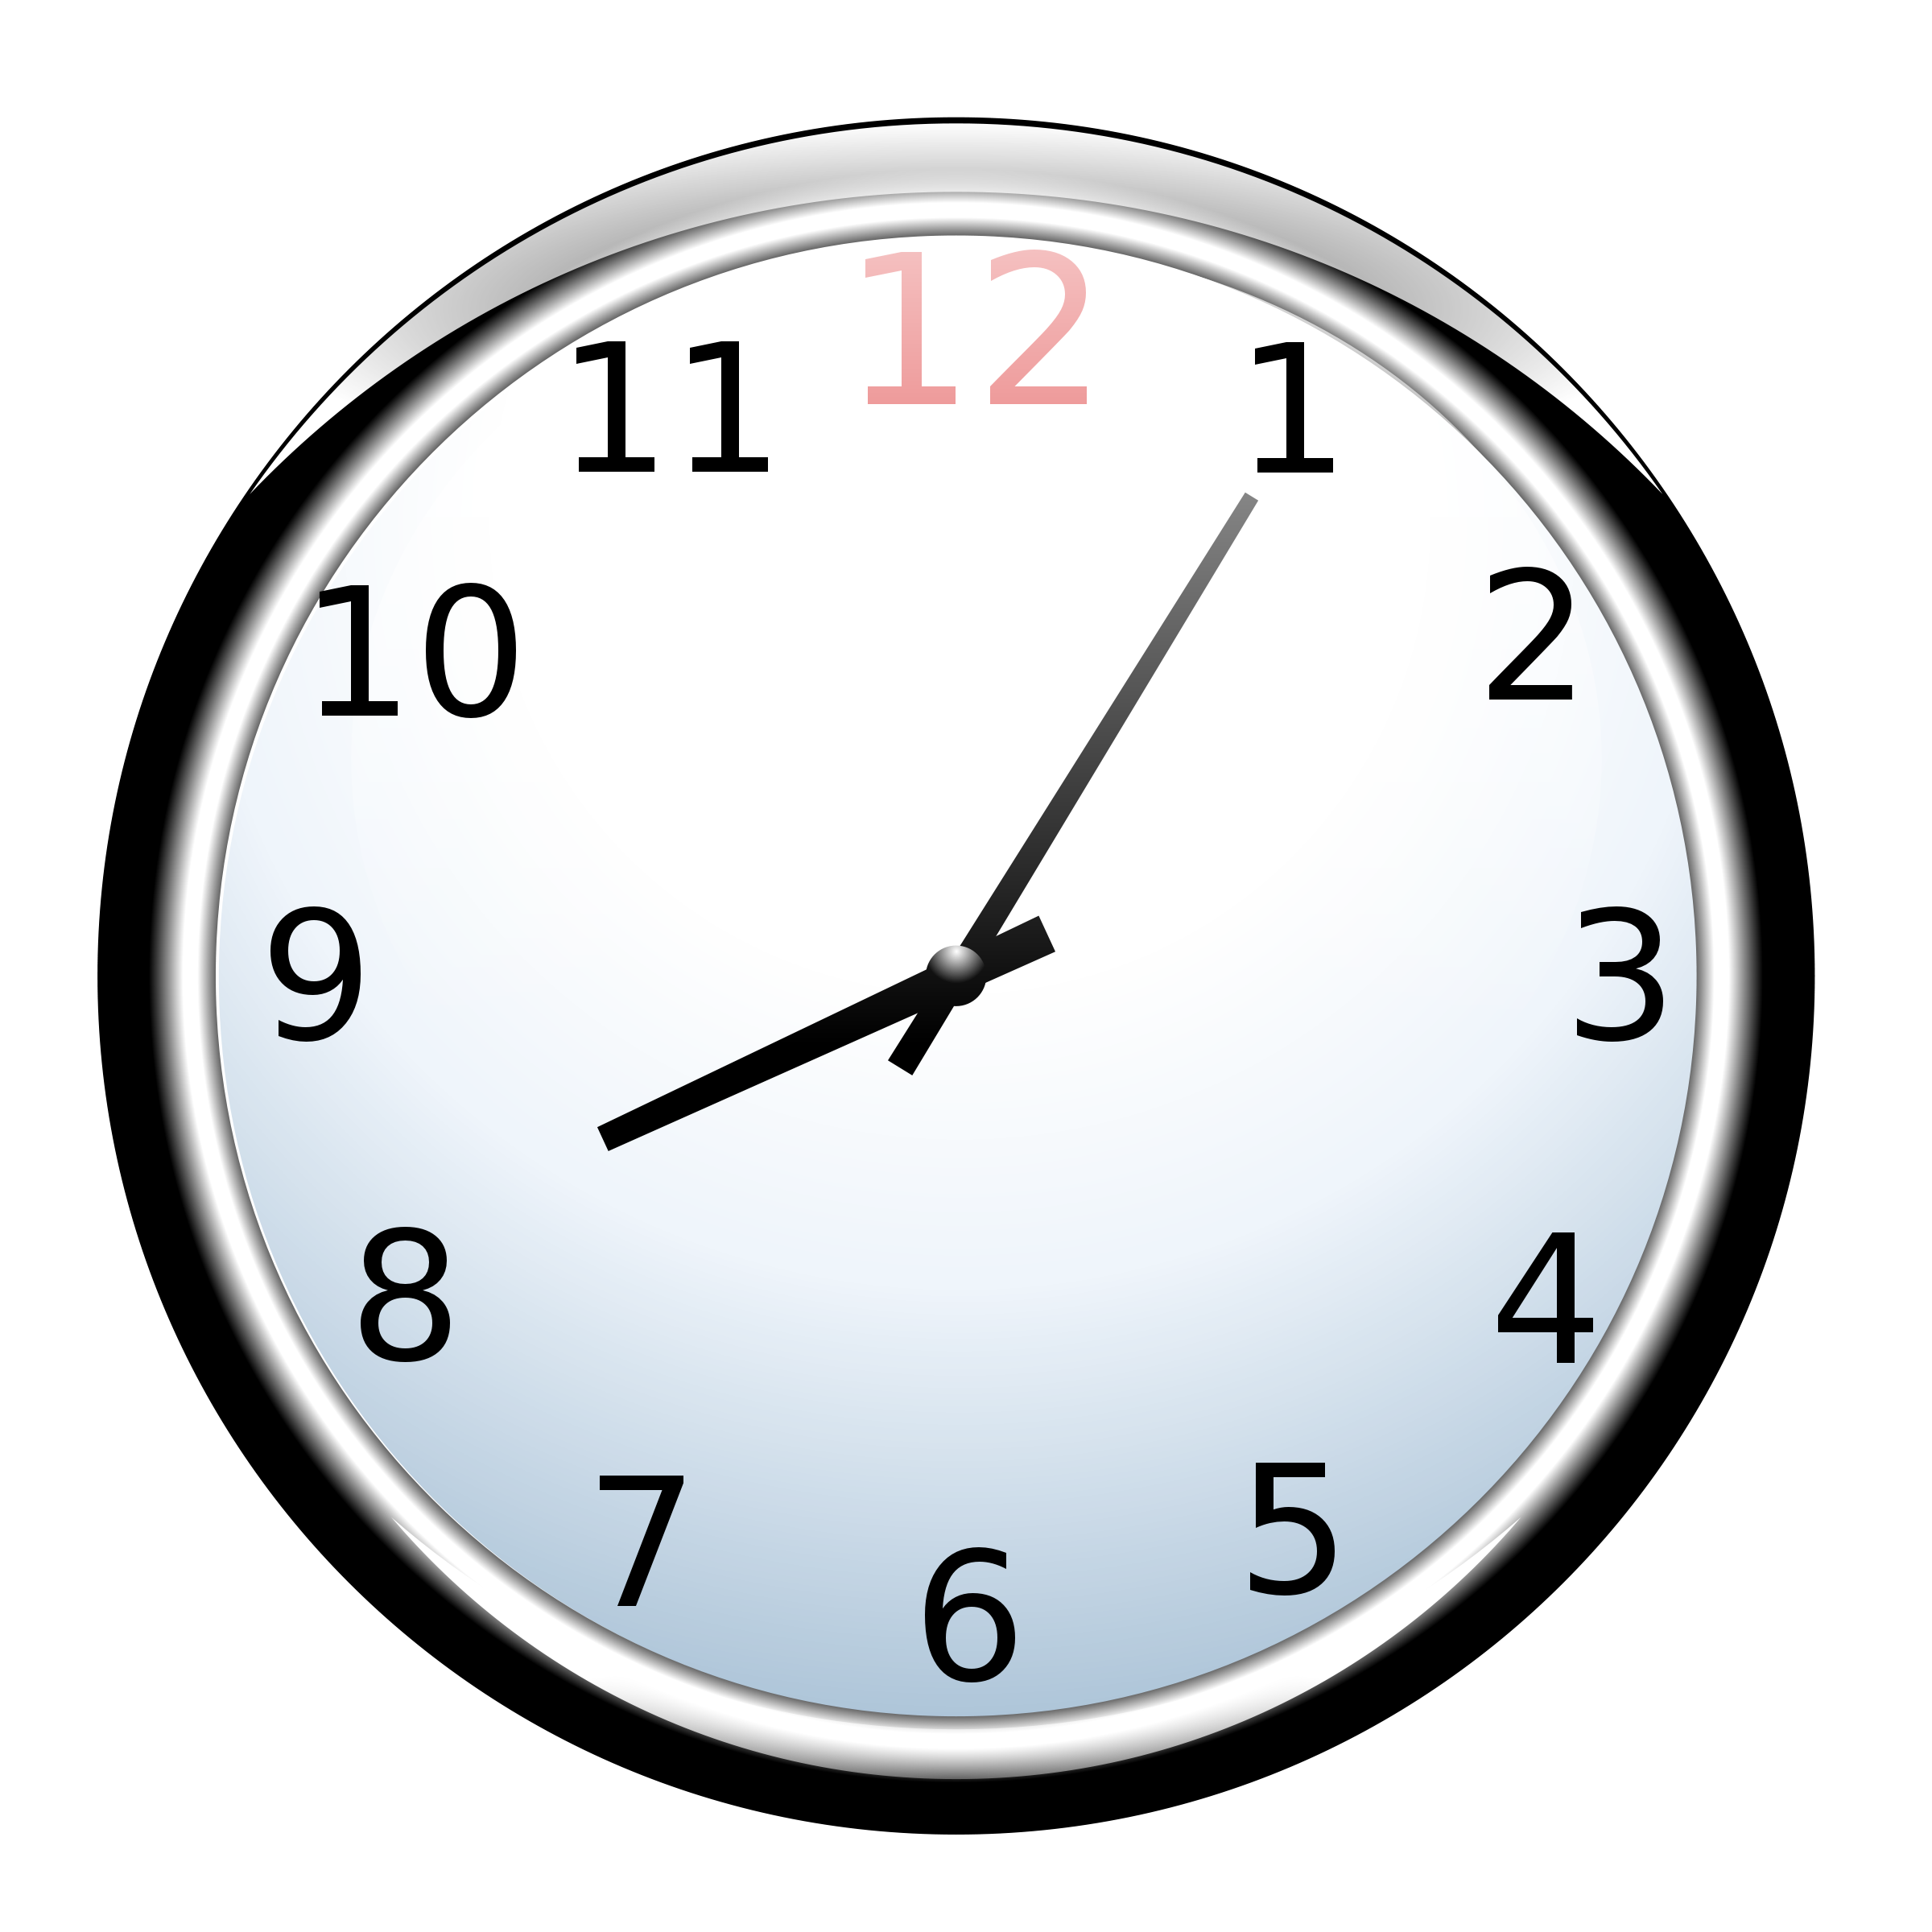 Clock Dial.png - Clipart library